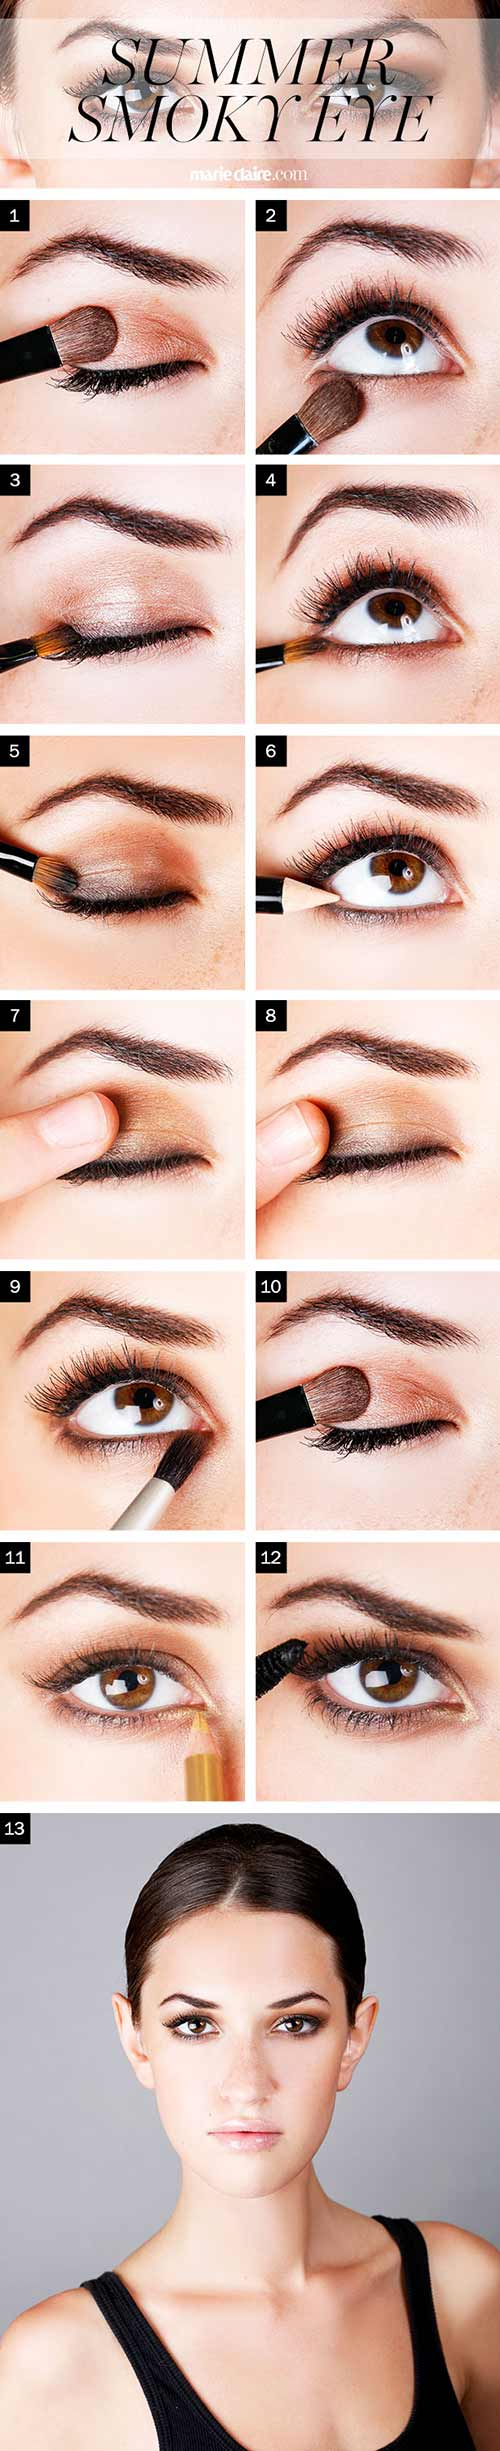 Night Party Eye Makeup How To Do Smokey Eye Makeup Top 10 Tutorial Pictures For 2019